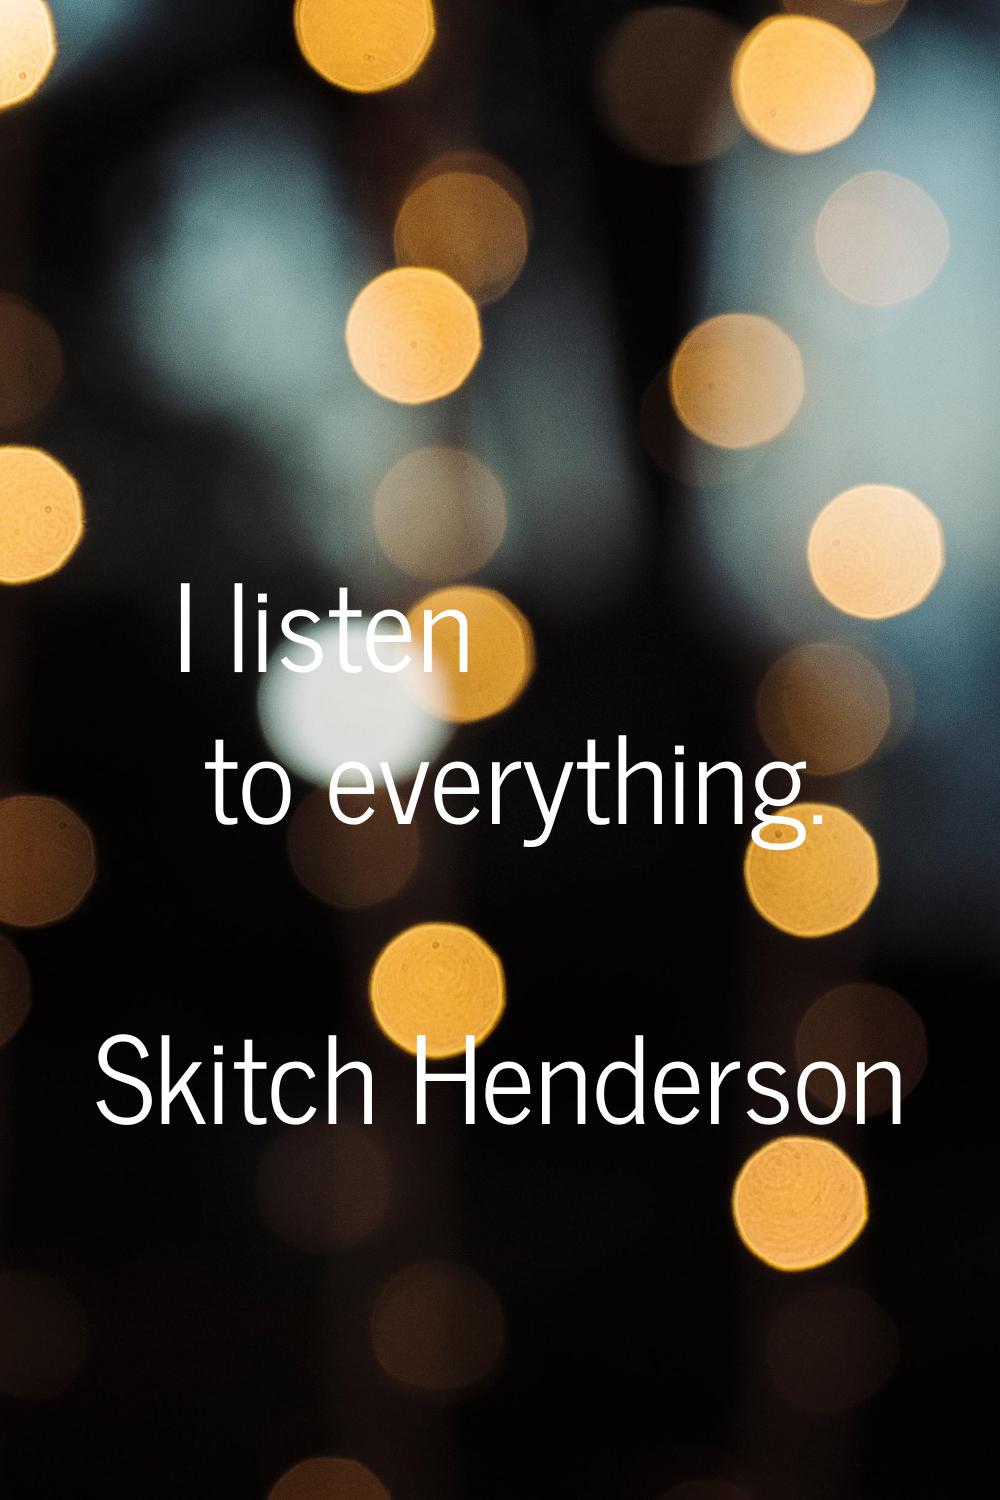 I listen to everything.